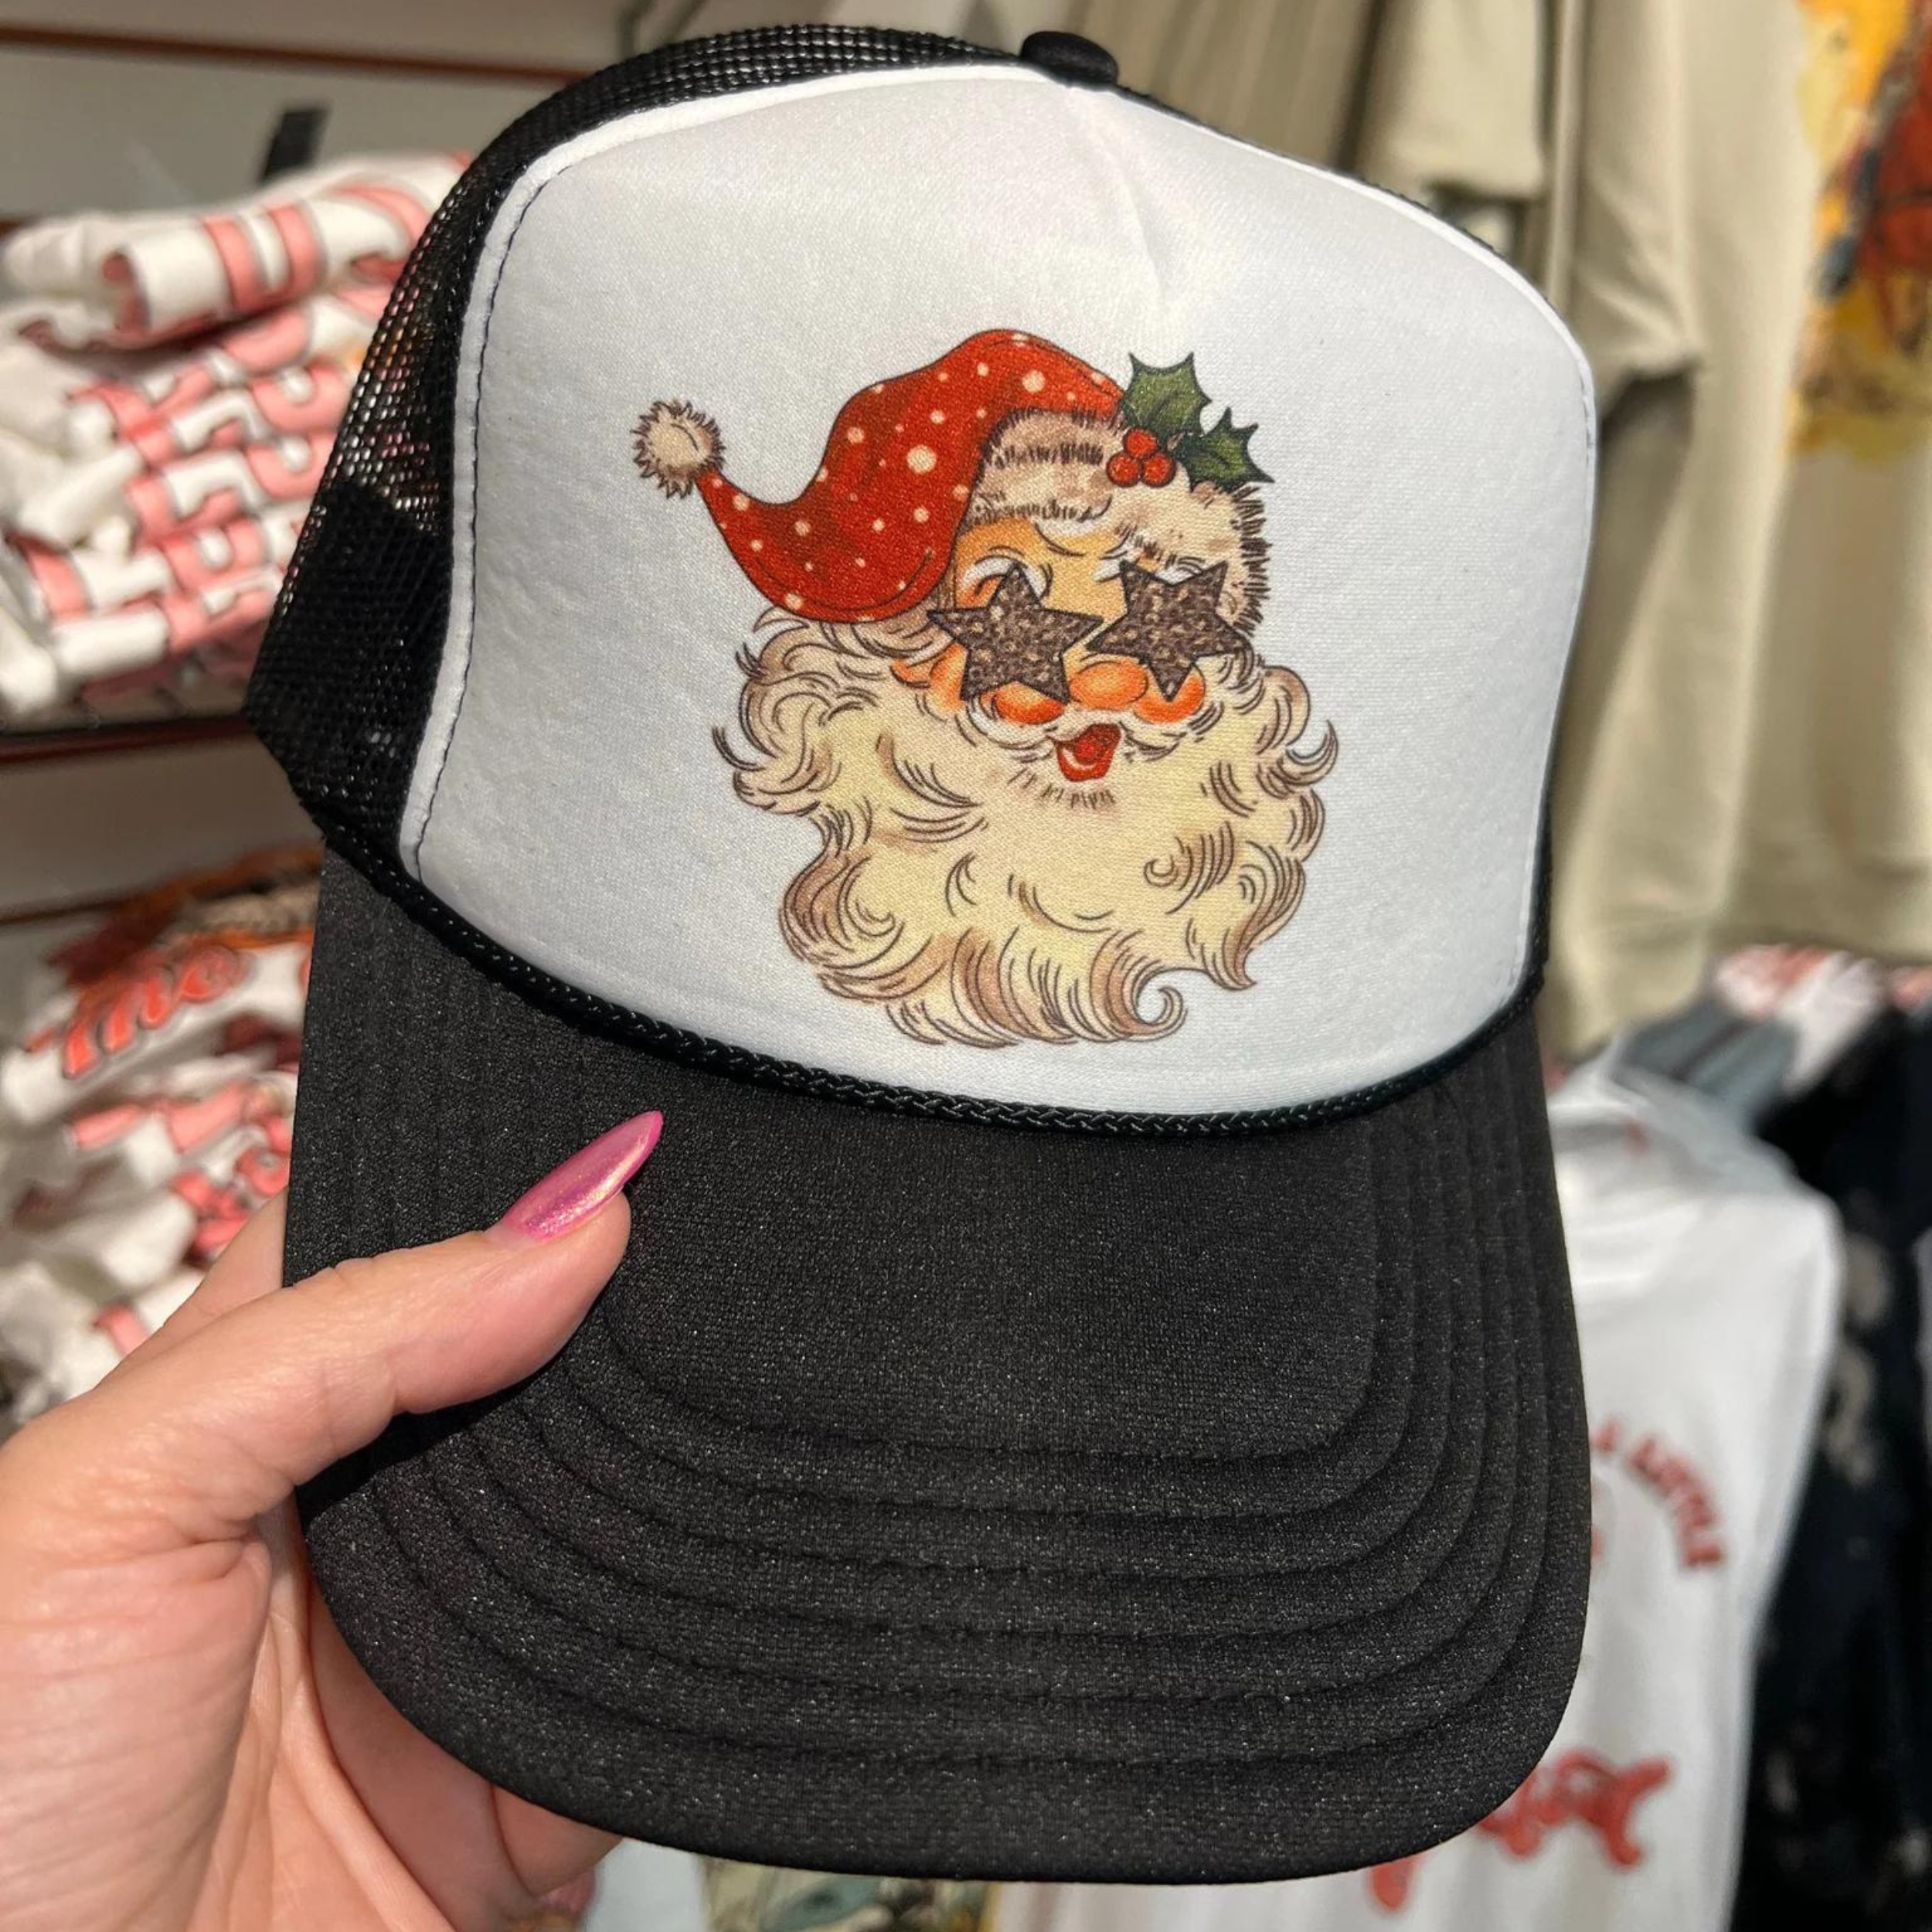 Photo features a black and white trucker hat with Santa's face on the front with star eyes.